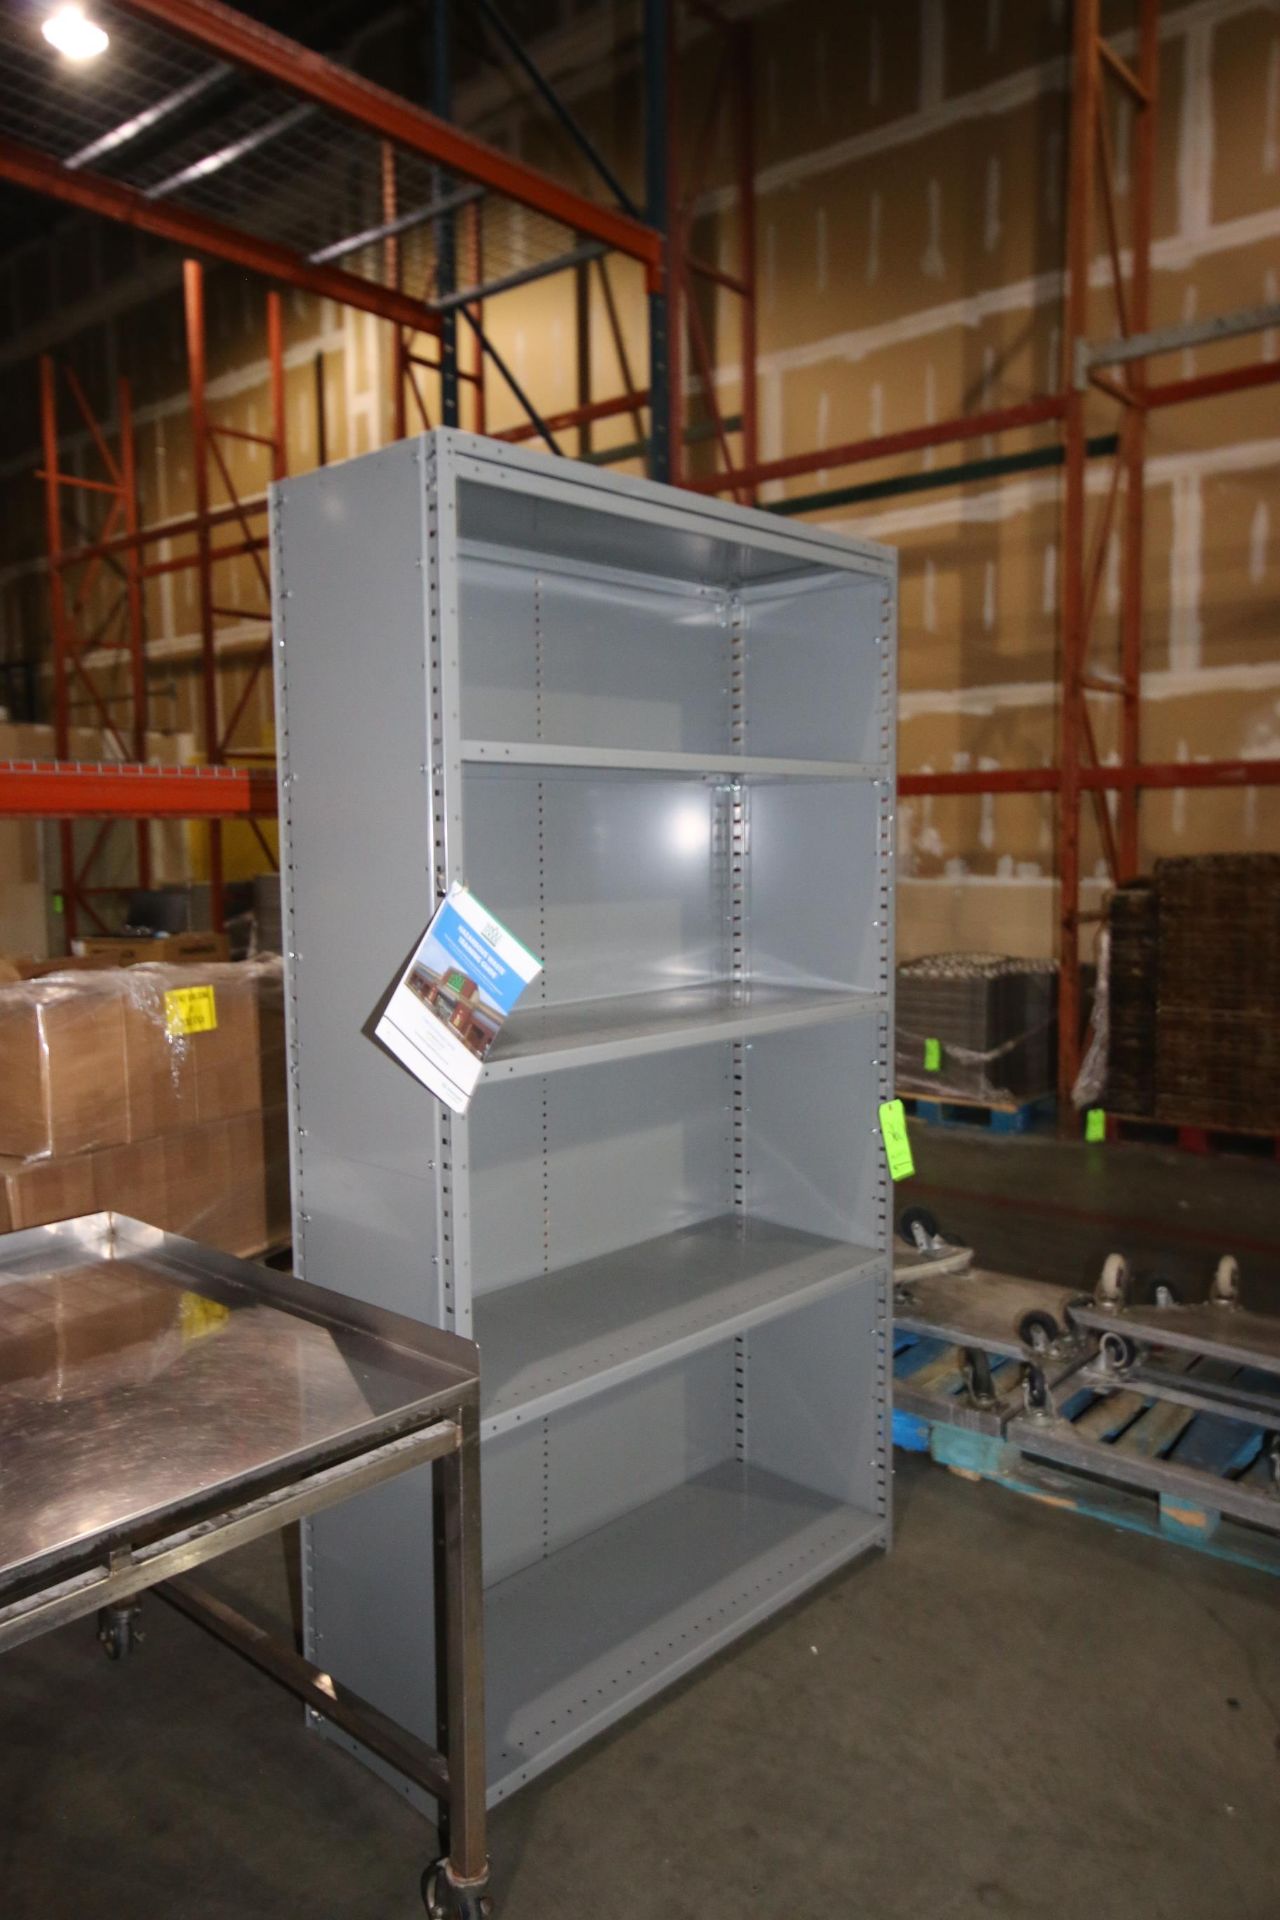 S/S Tables, (2) S/S Tables Mounted on Casters, (2) with S/S Bottom Shelf, Includes Aluminum Book - Image 4 of 4